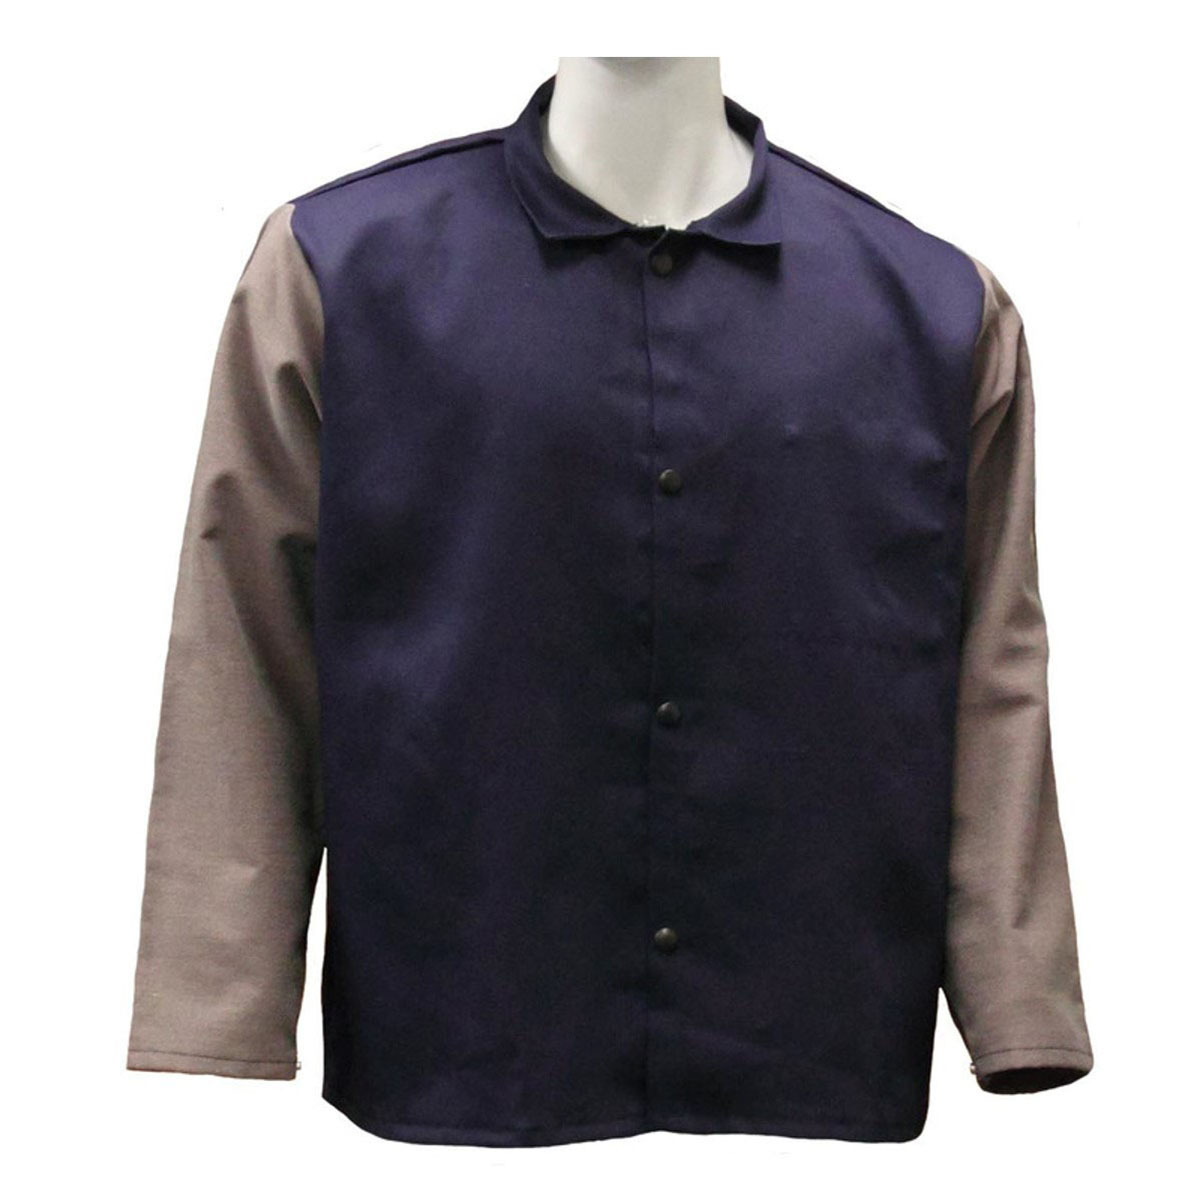 Stanco Safety Products™ Small Navy Blue Indura® Cotton Flame Resistant Welding Jacket